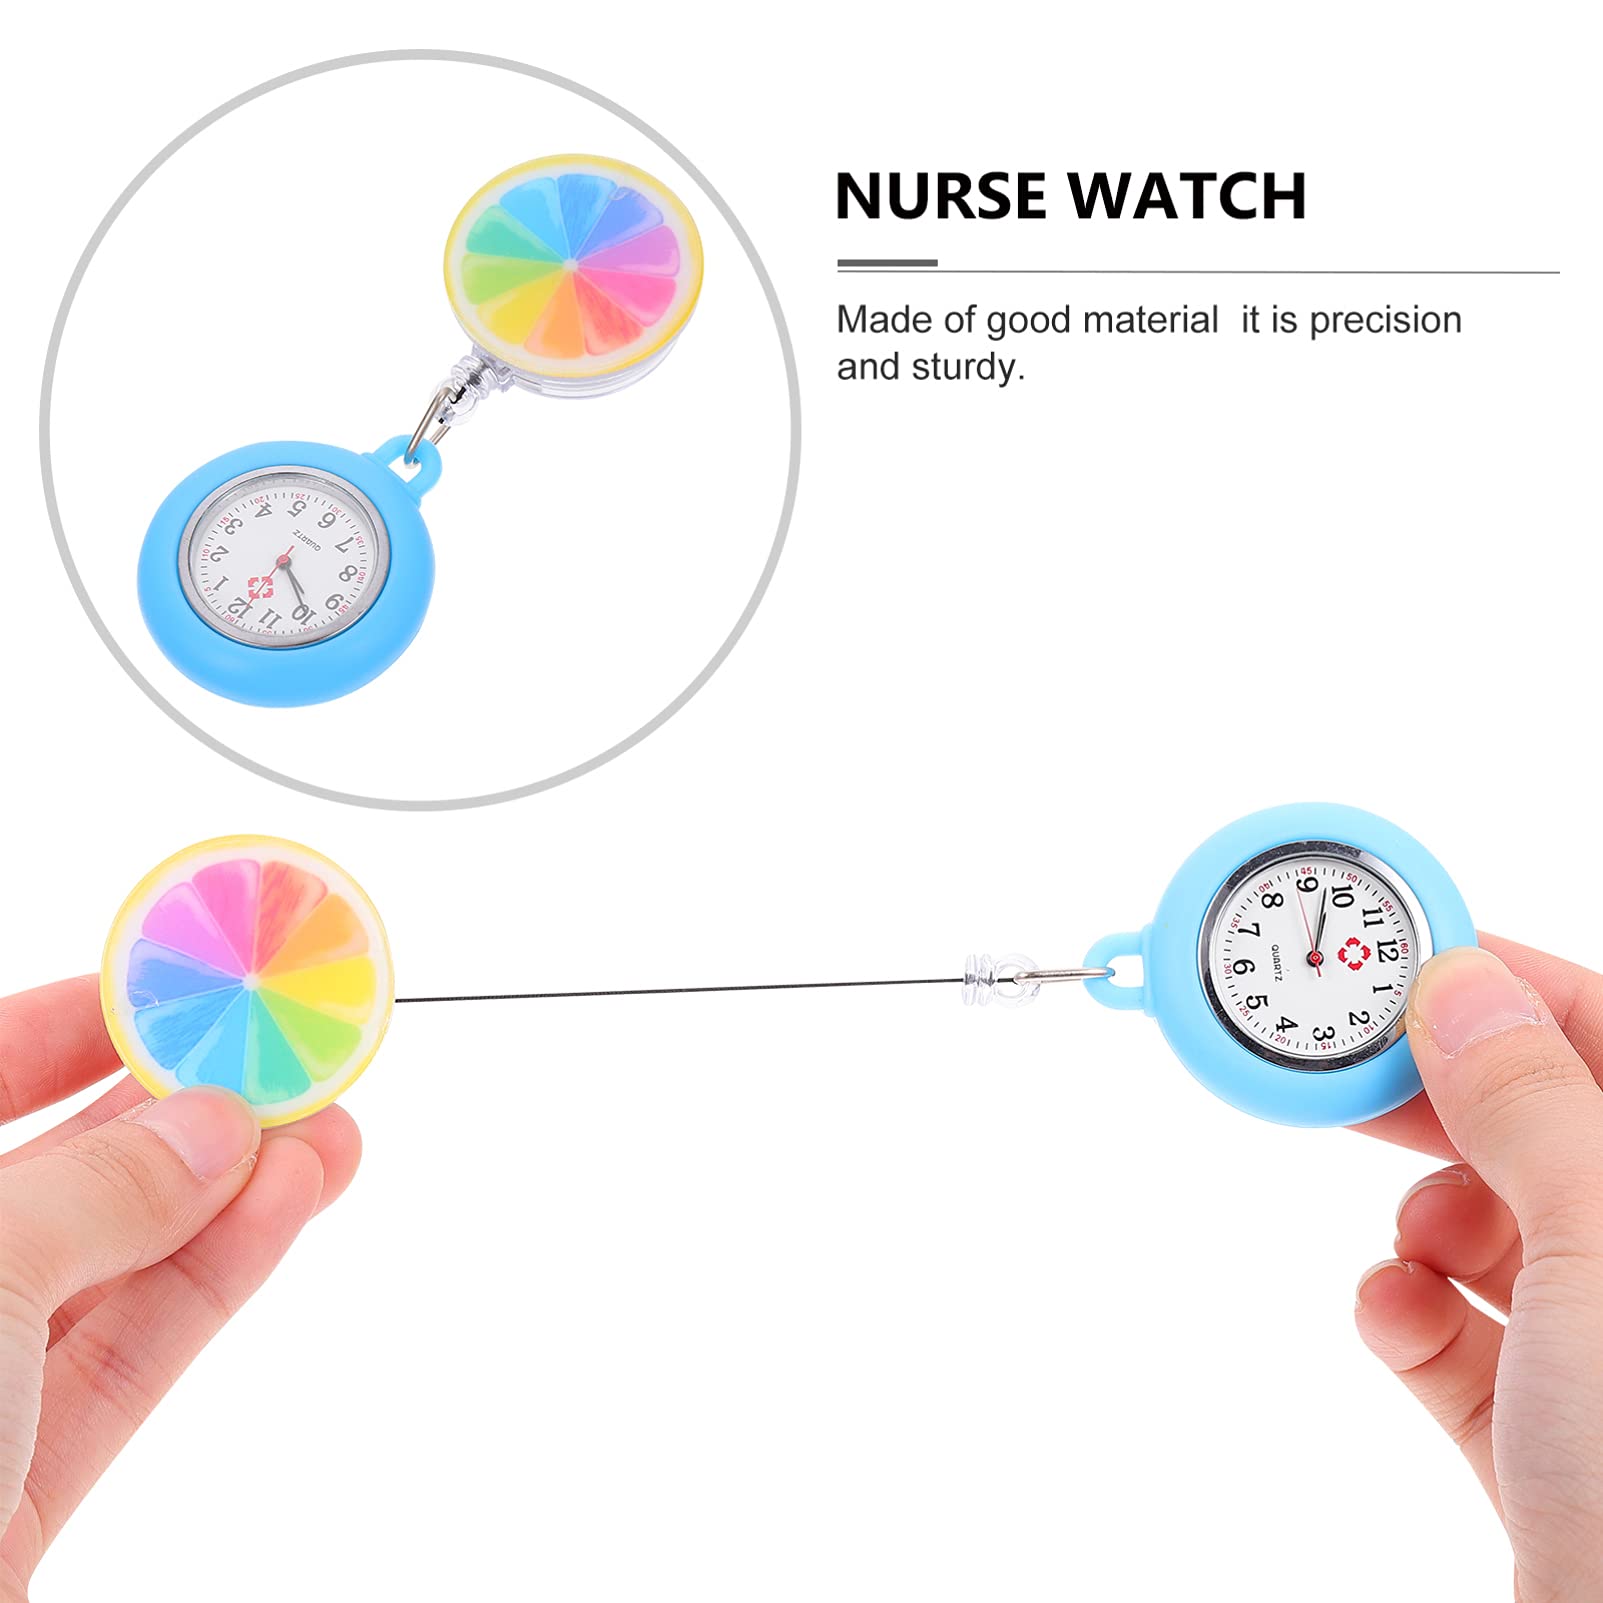 Hemobllo Retractable Nurse Watch with Lemon Slice Glass Lapel Watch Quartz Watch Clip On Watch with Second Hand Stethoscope Badge Fob Medical Pocket Watch Jewelry Gift Yellow